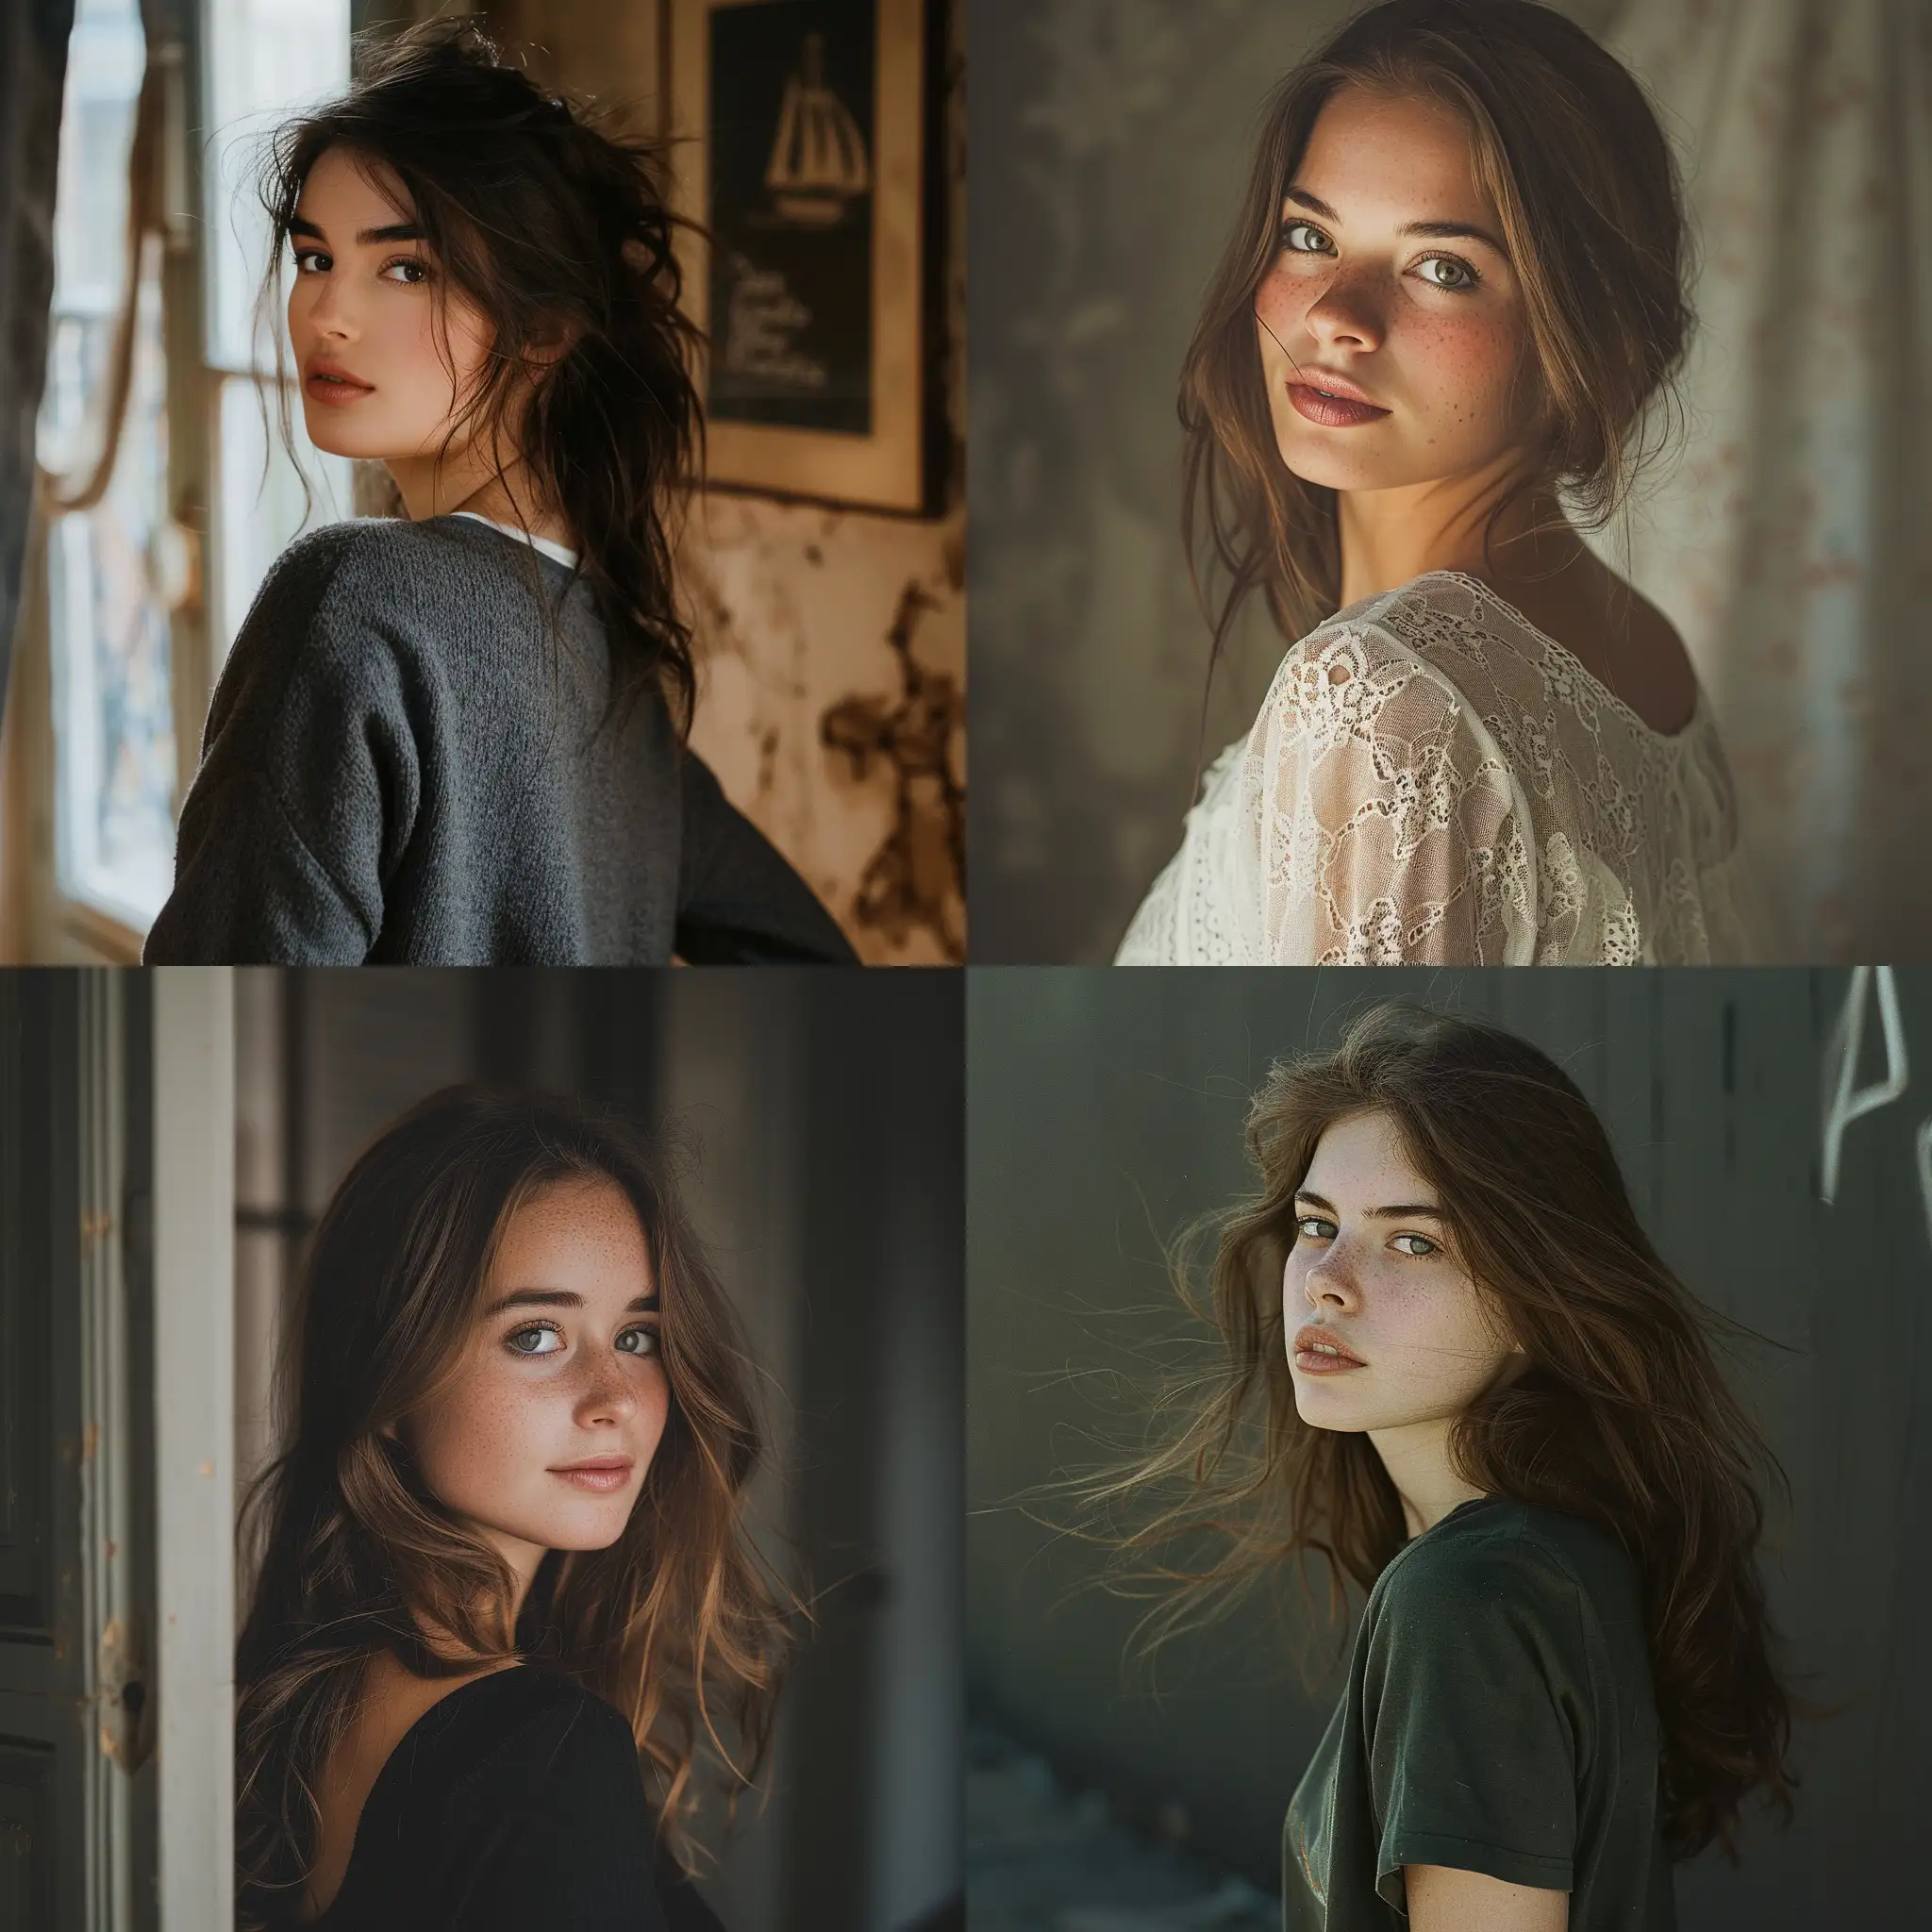 Cute young woman looking confidently away from camera, photographed by Camilla Vivier, ar 9:16 — stylize 700 — style raw